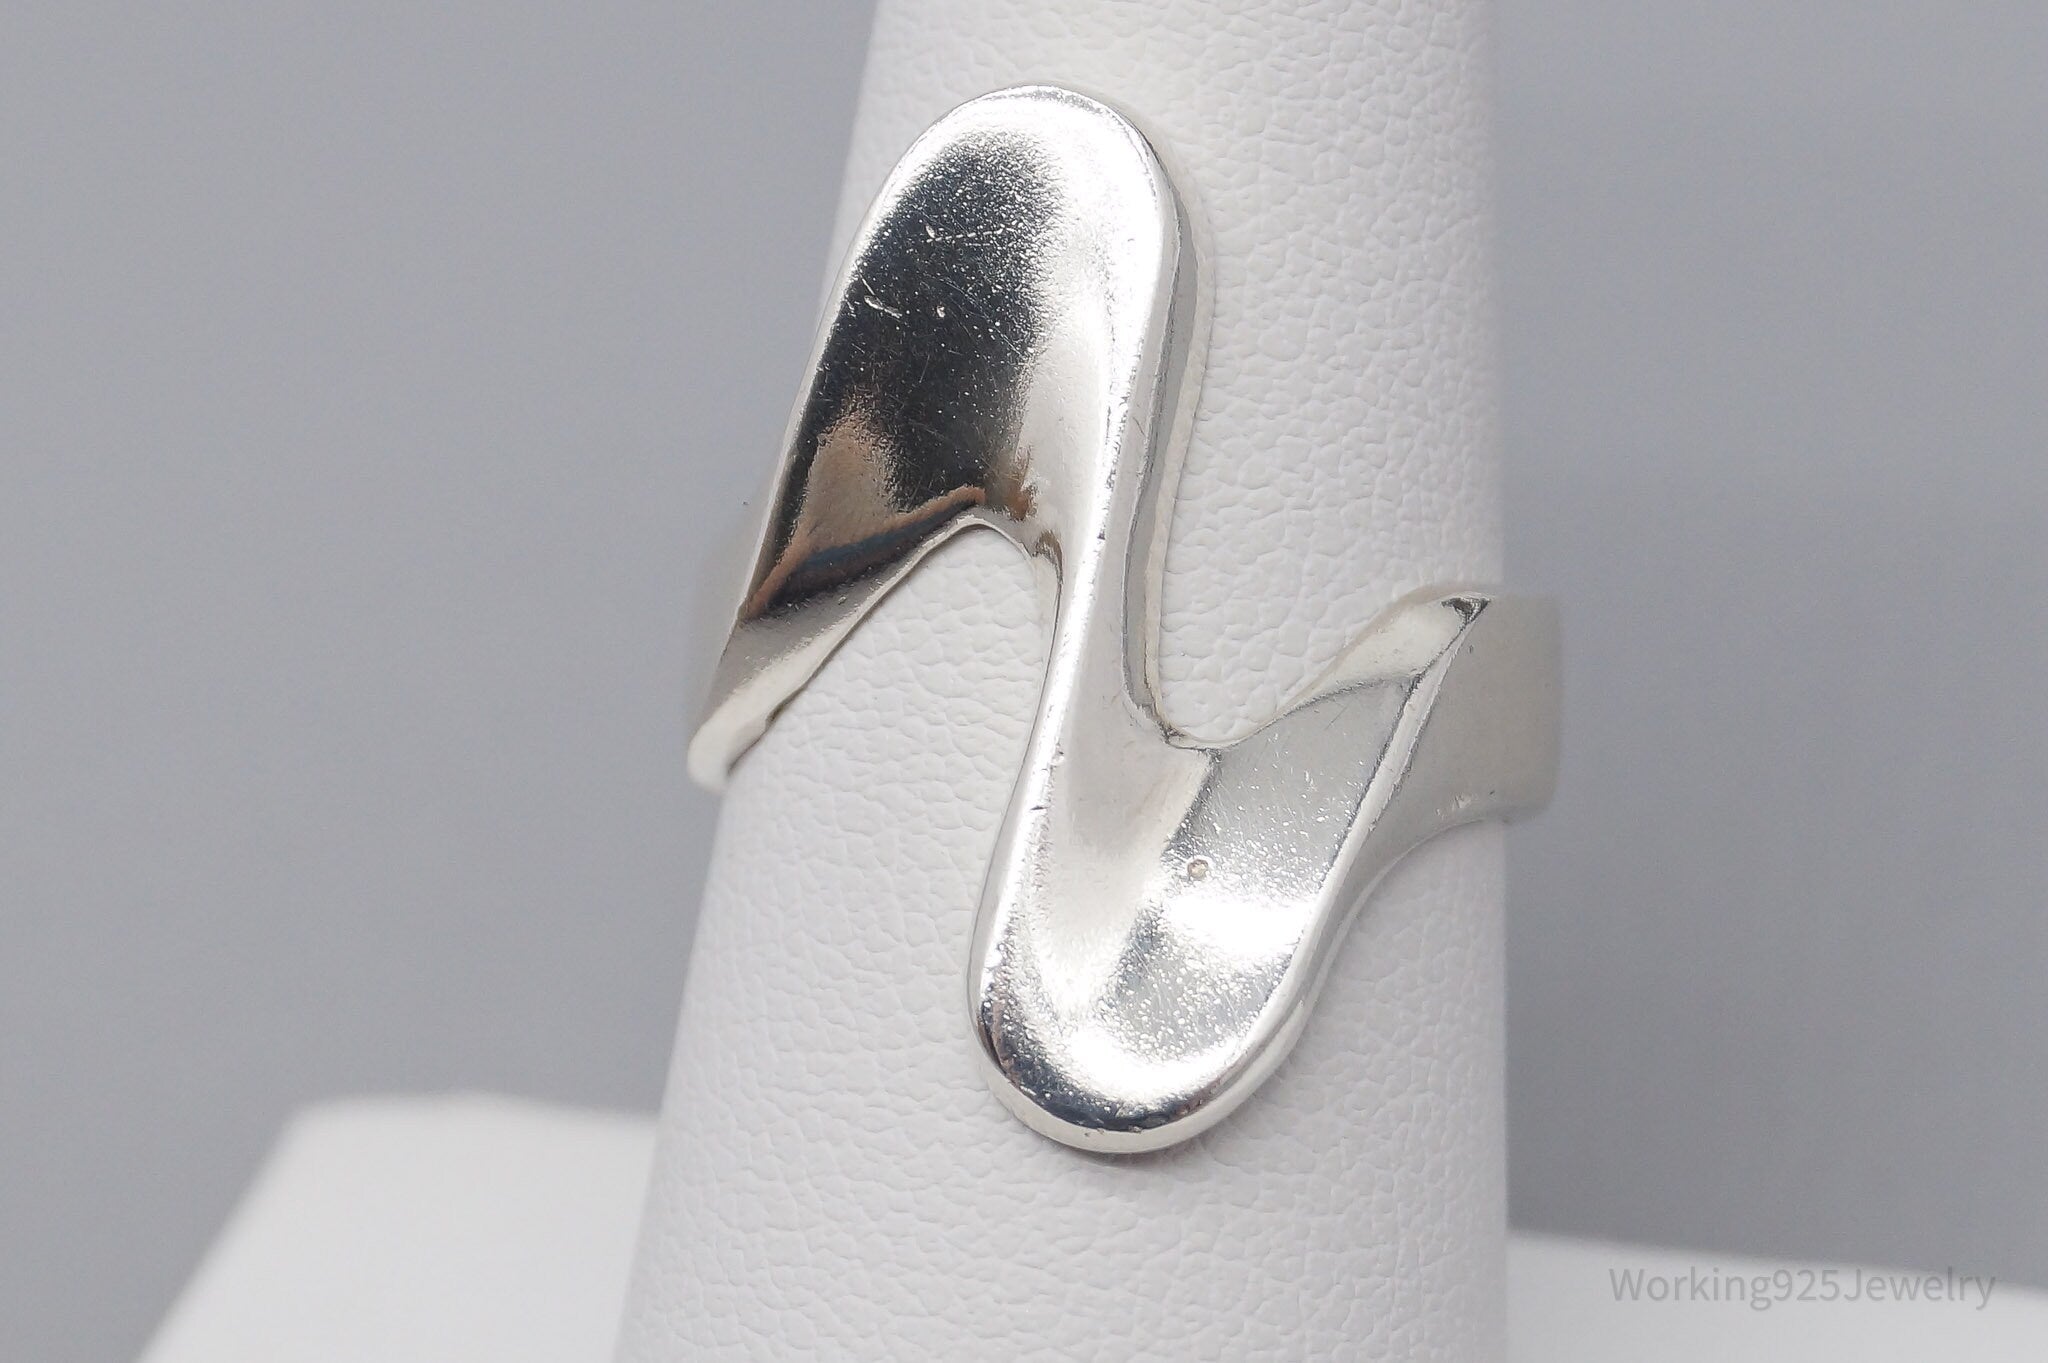 Vintage Mexican Modernist Style Wave Sterling Silver Ring - Size 7.25